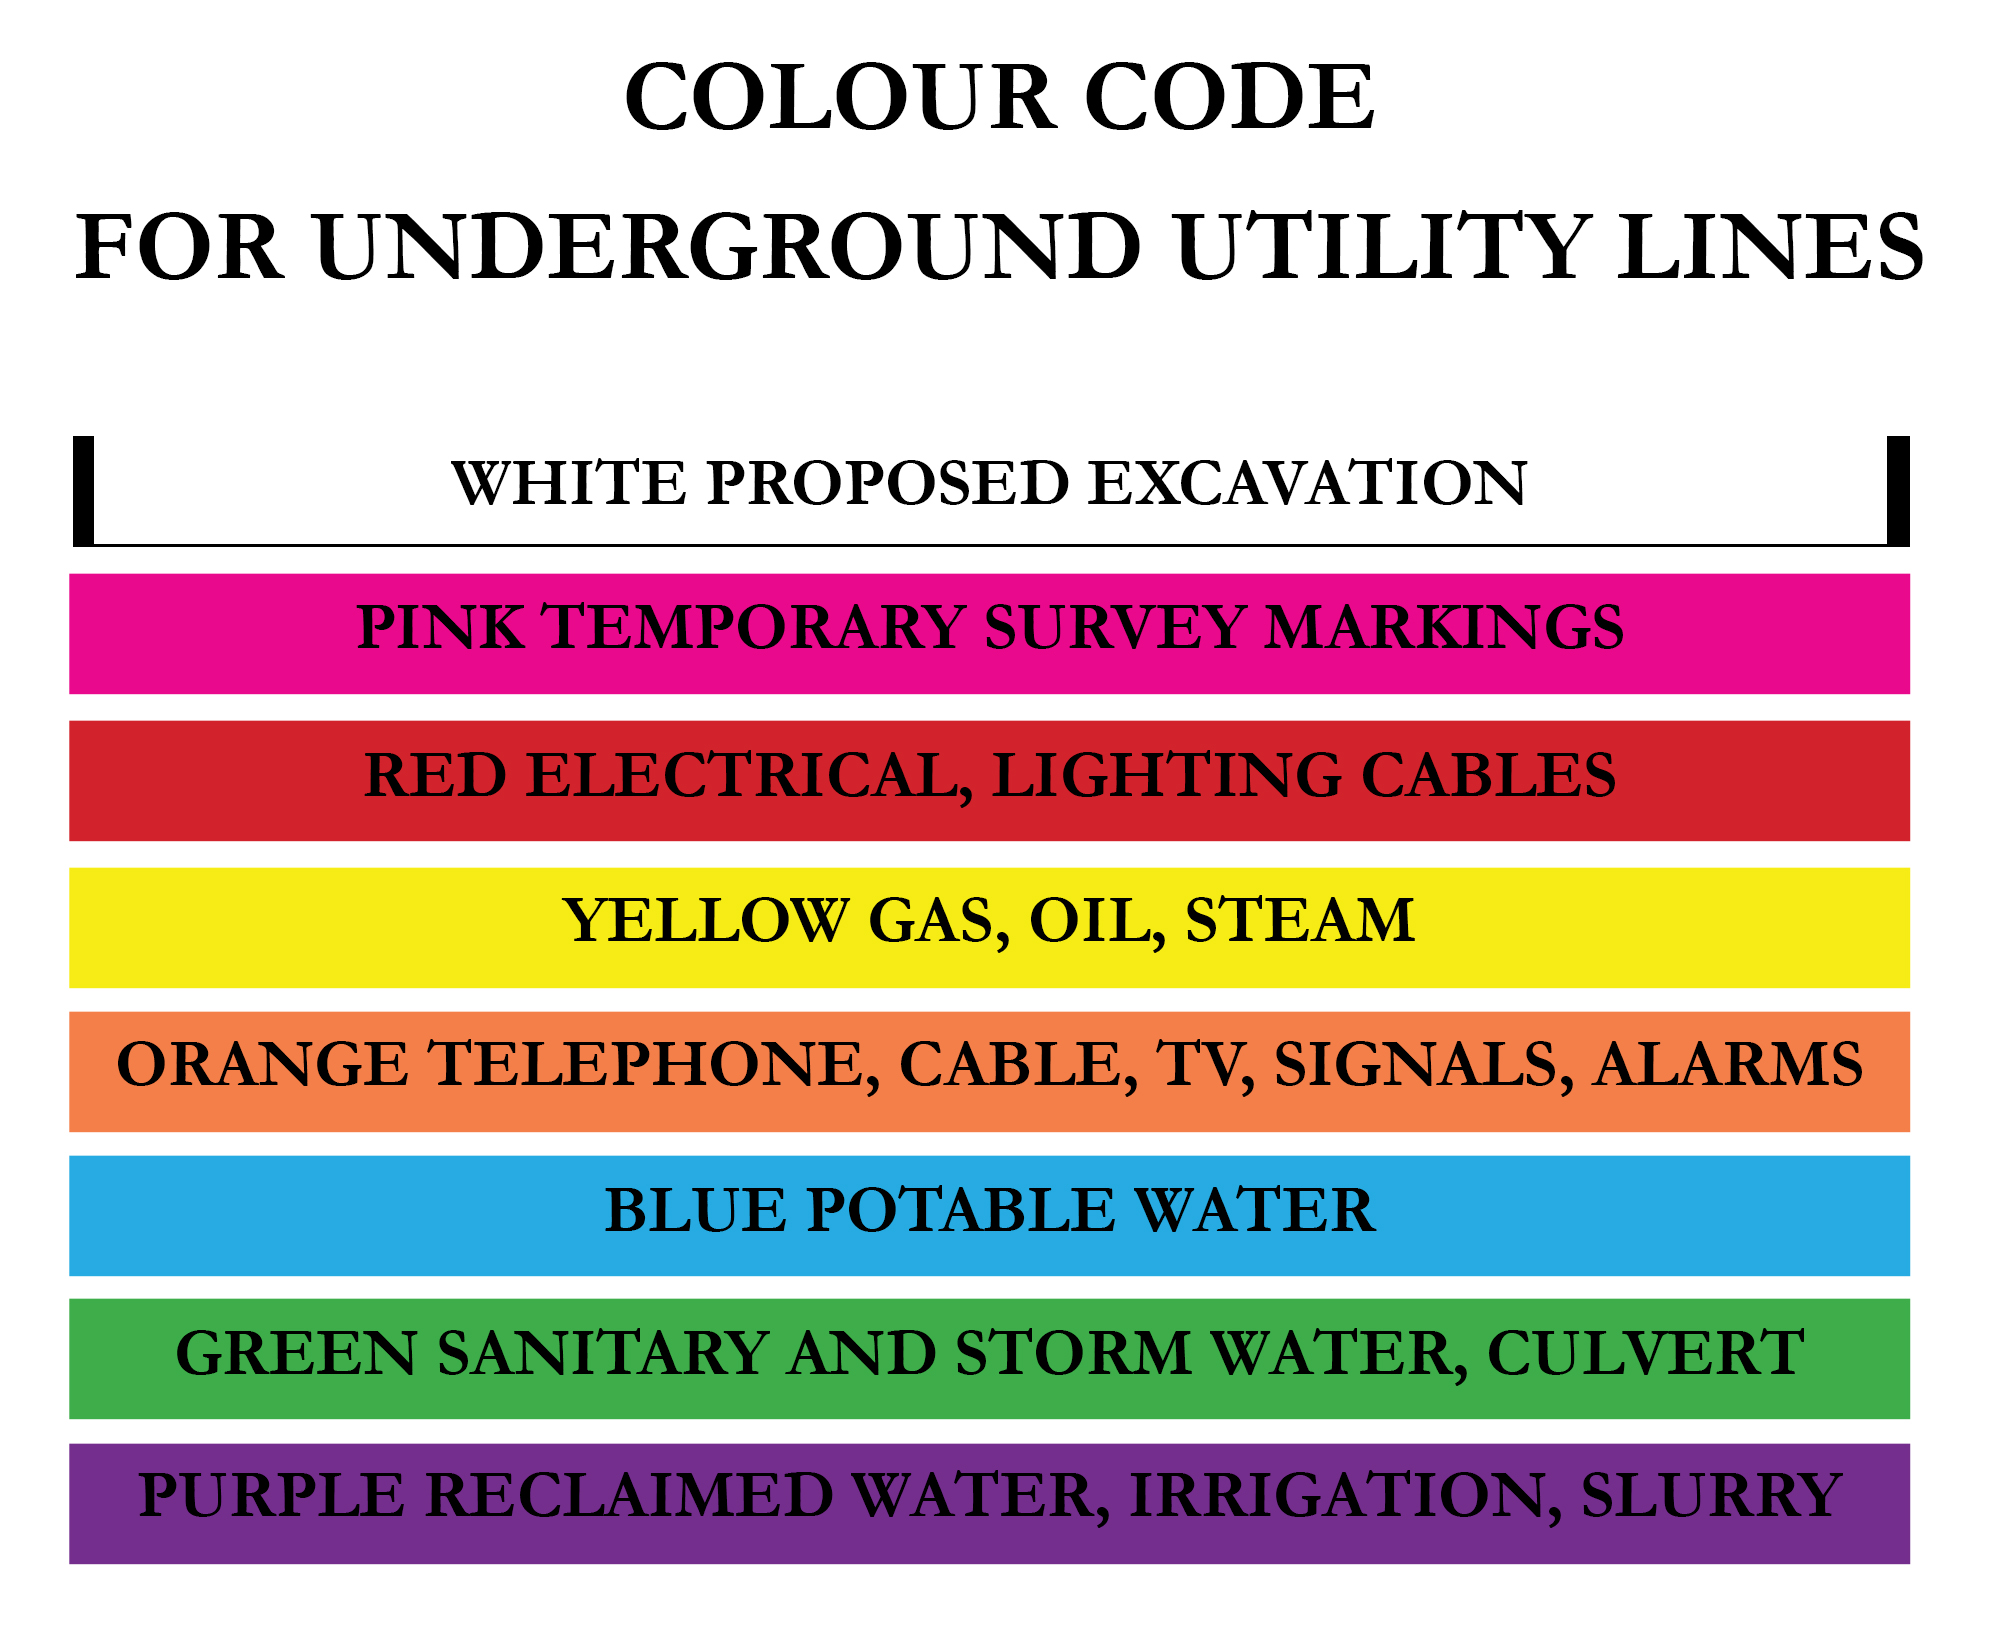 Image of Colour Code for construction safety and oilfield safety.